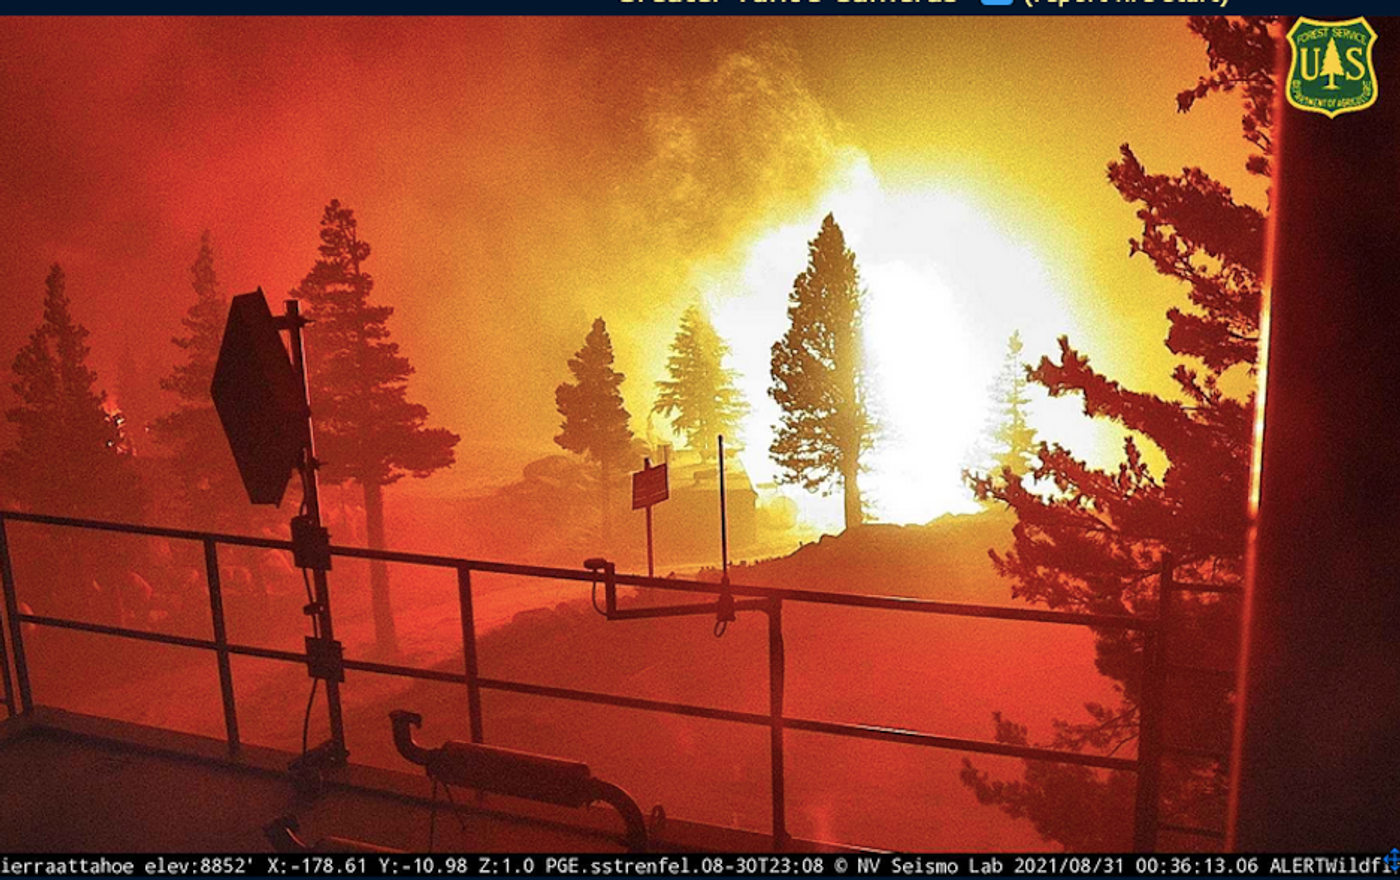 A screenshot from a live feed of a US Forest Service Camera near Lake Tahoe, taken August 31, 2021 by Carmen Leitch